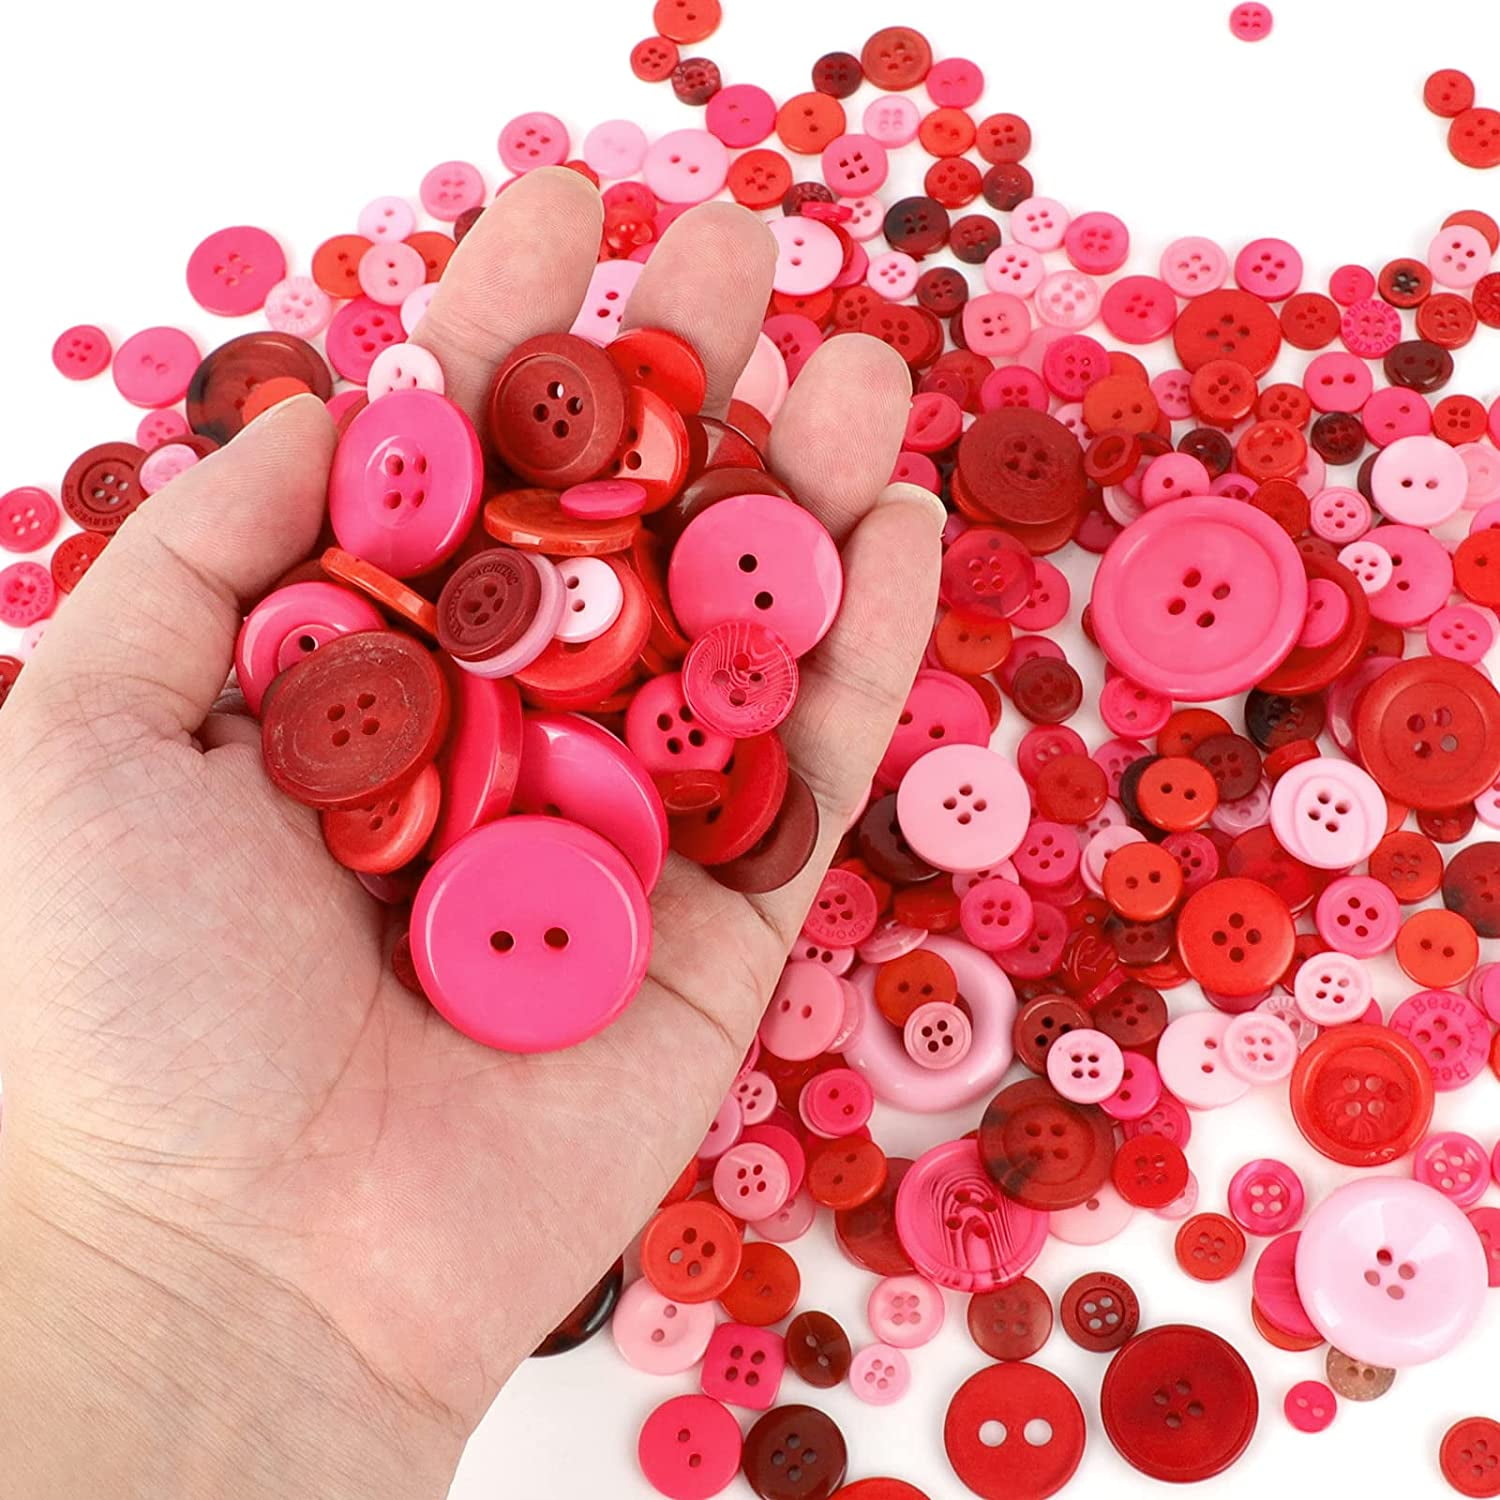 Swpeet 1000pcs Christmas Assorted Craft Buttons, 2 and 4 Holes Red Round Craft Resin Sewing Buttons Suitable for Christmas Sewing Decorations, Art 